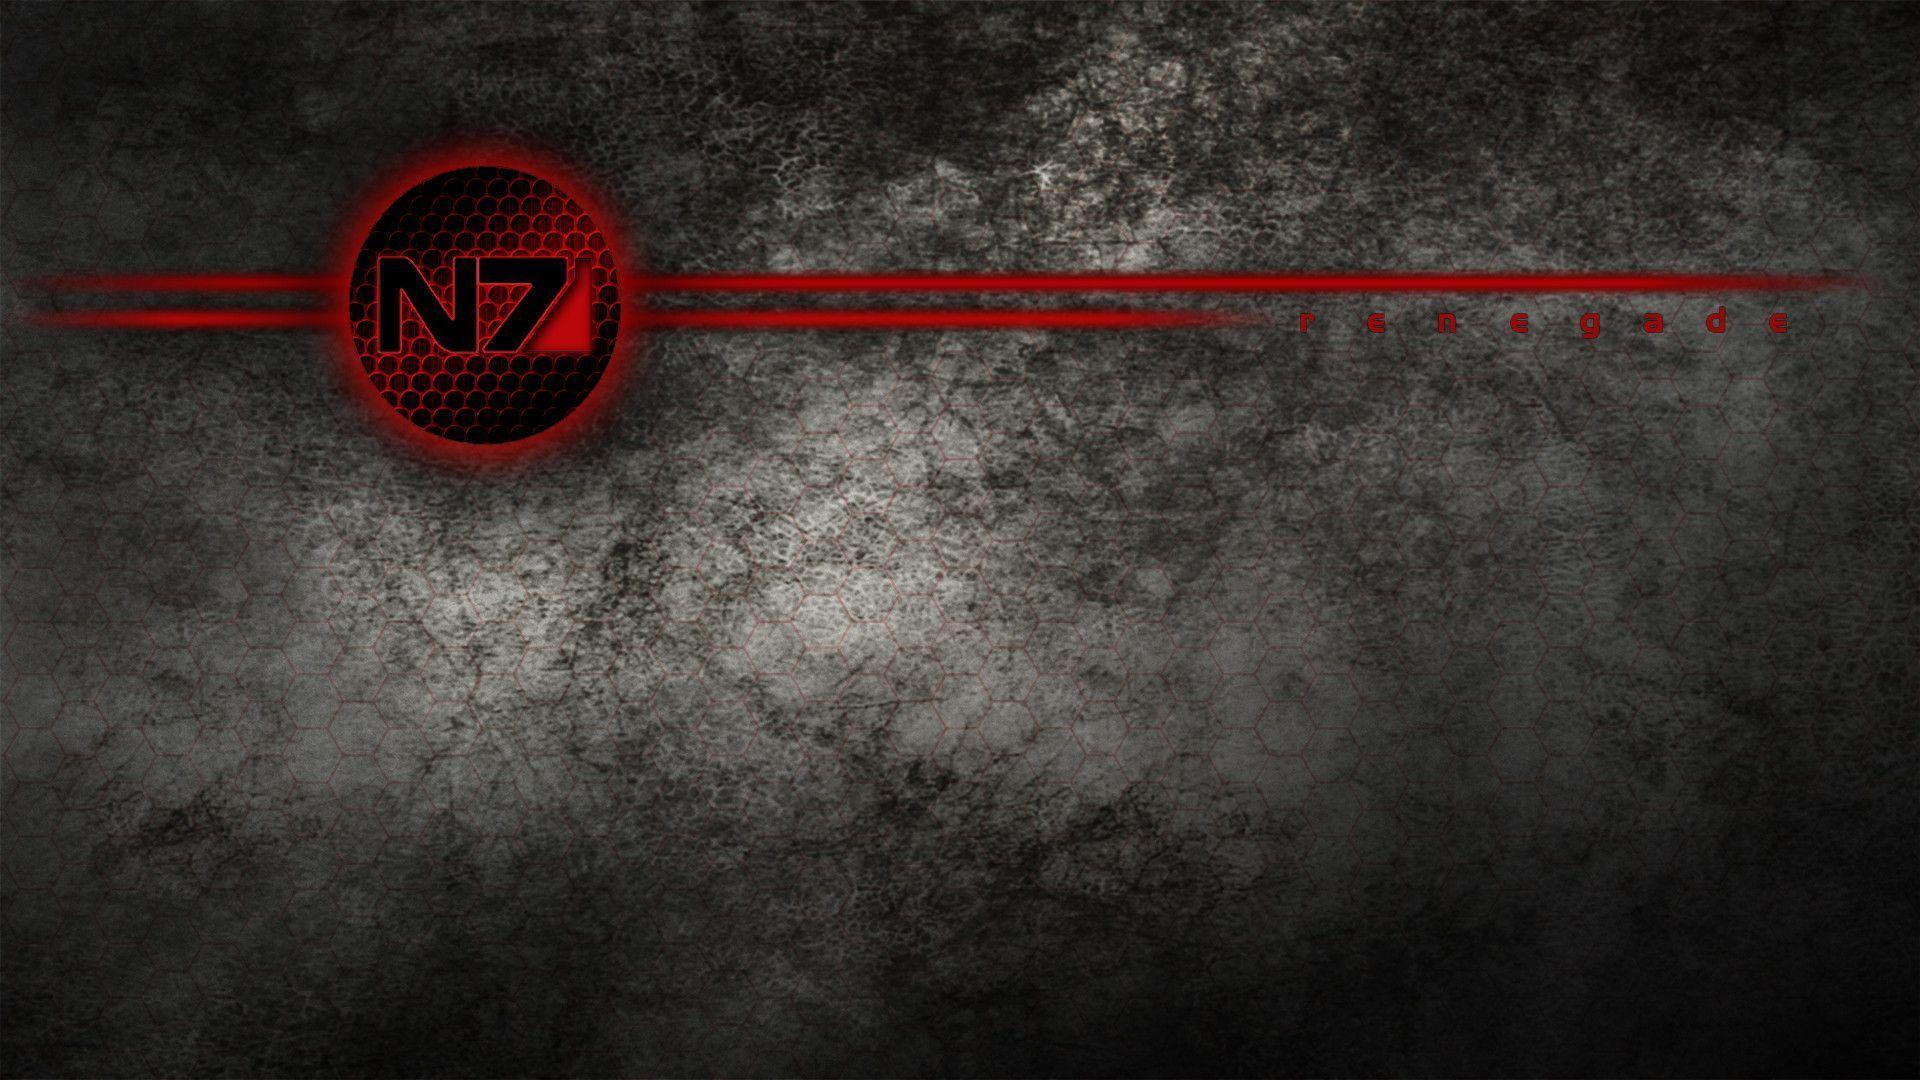 deviantART: More Like N7 Wallpapers Bubble by GuardianoftheForce